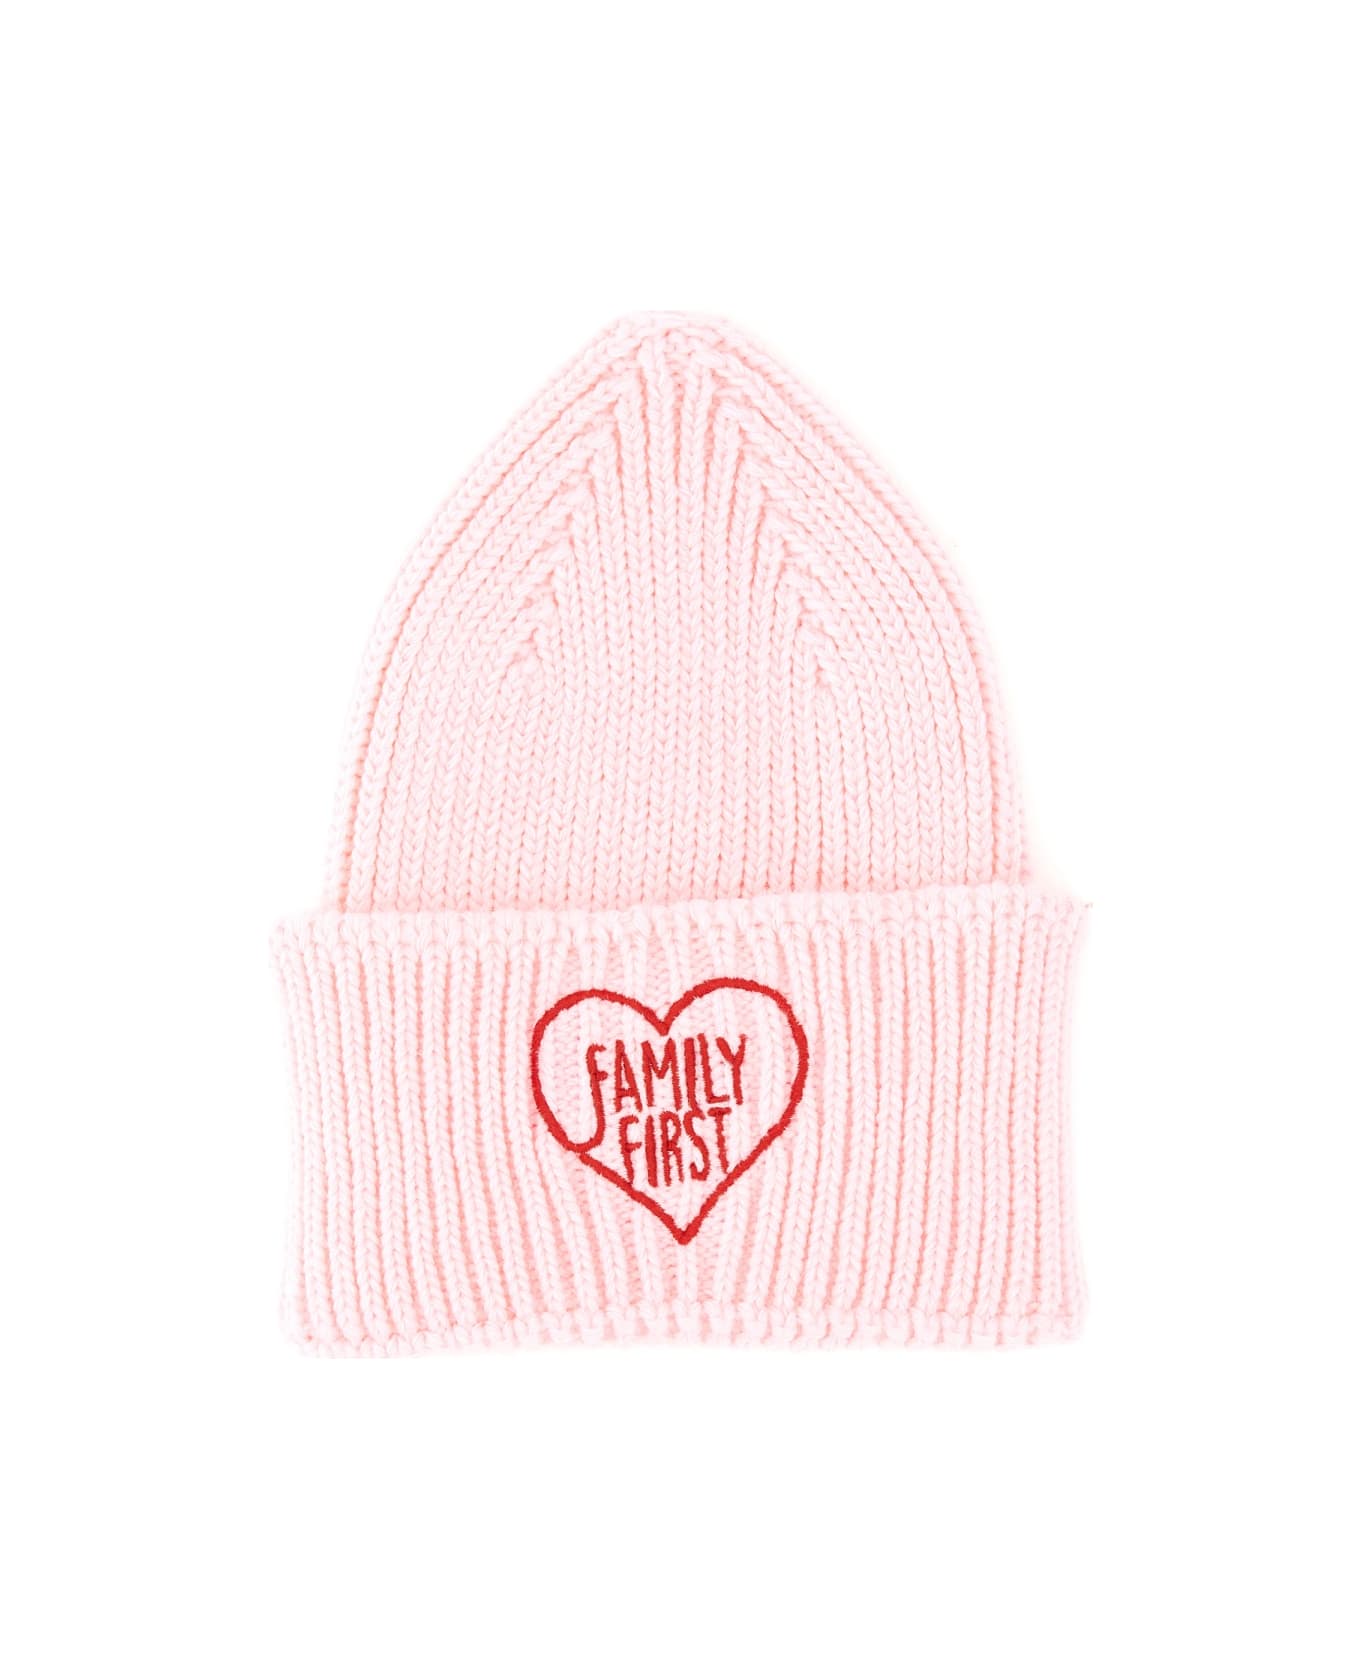 Family First Milano Beanie Hat - PINK